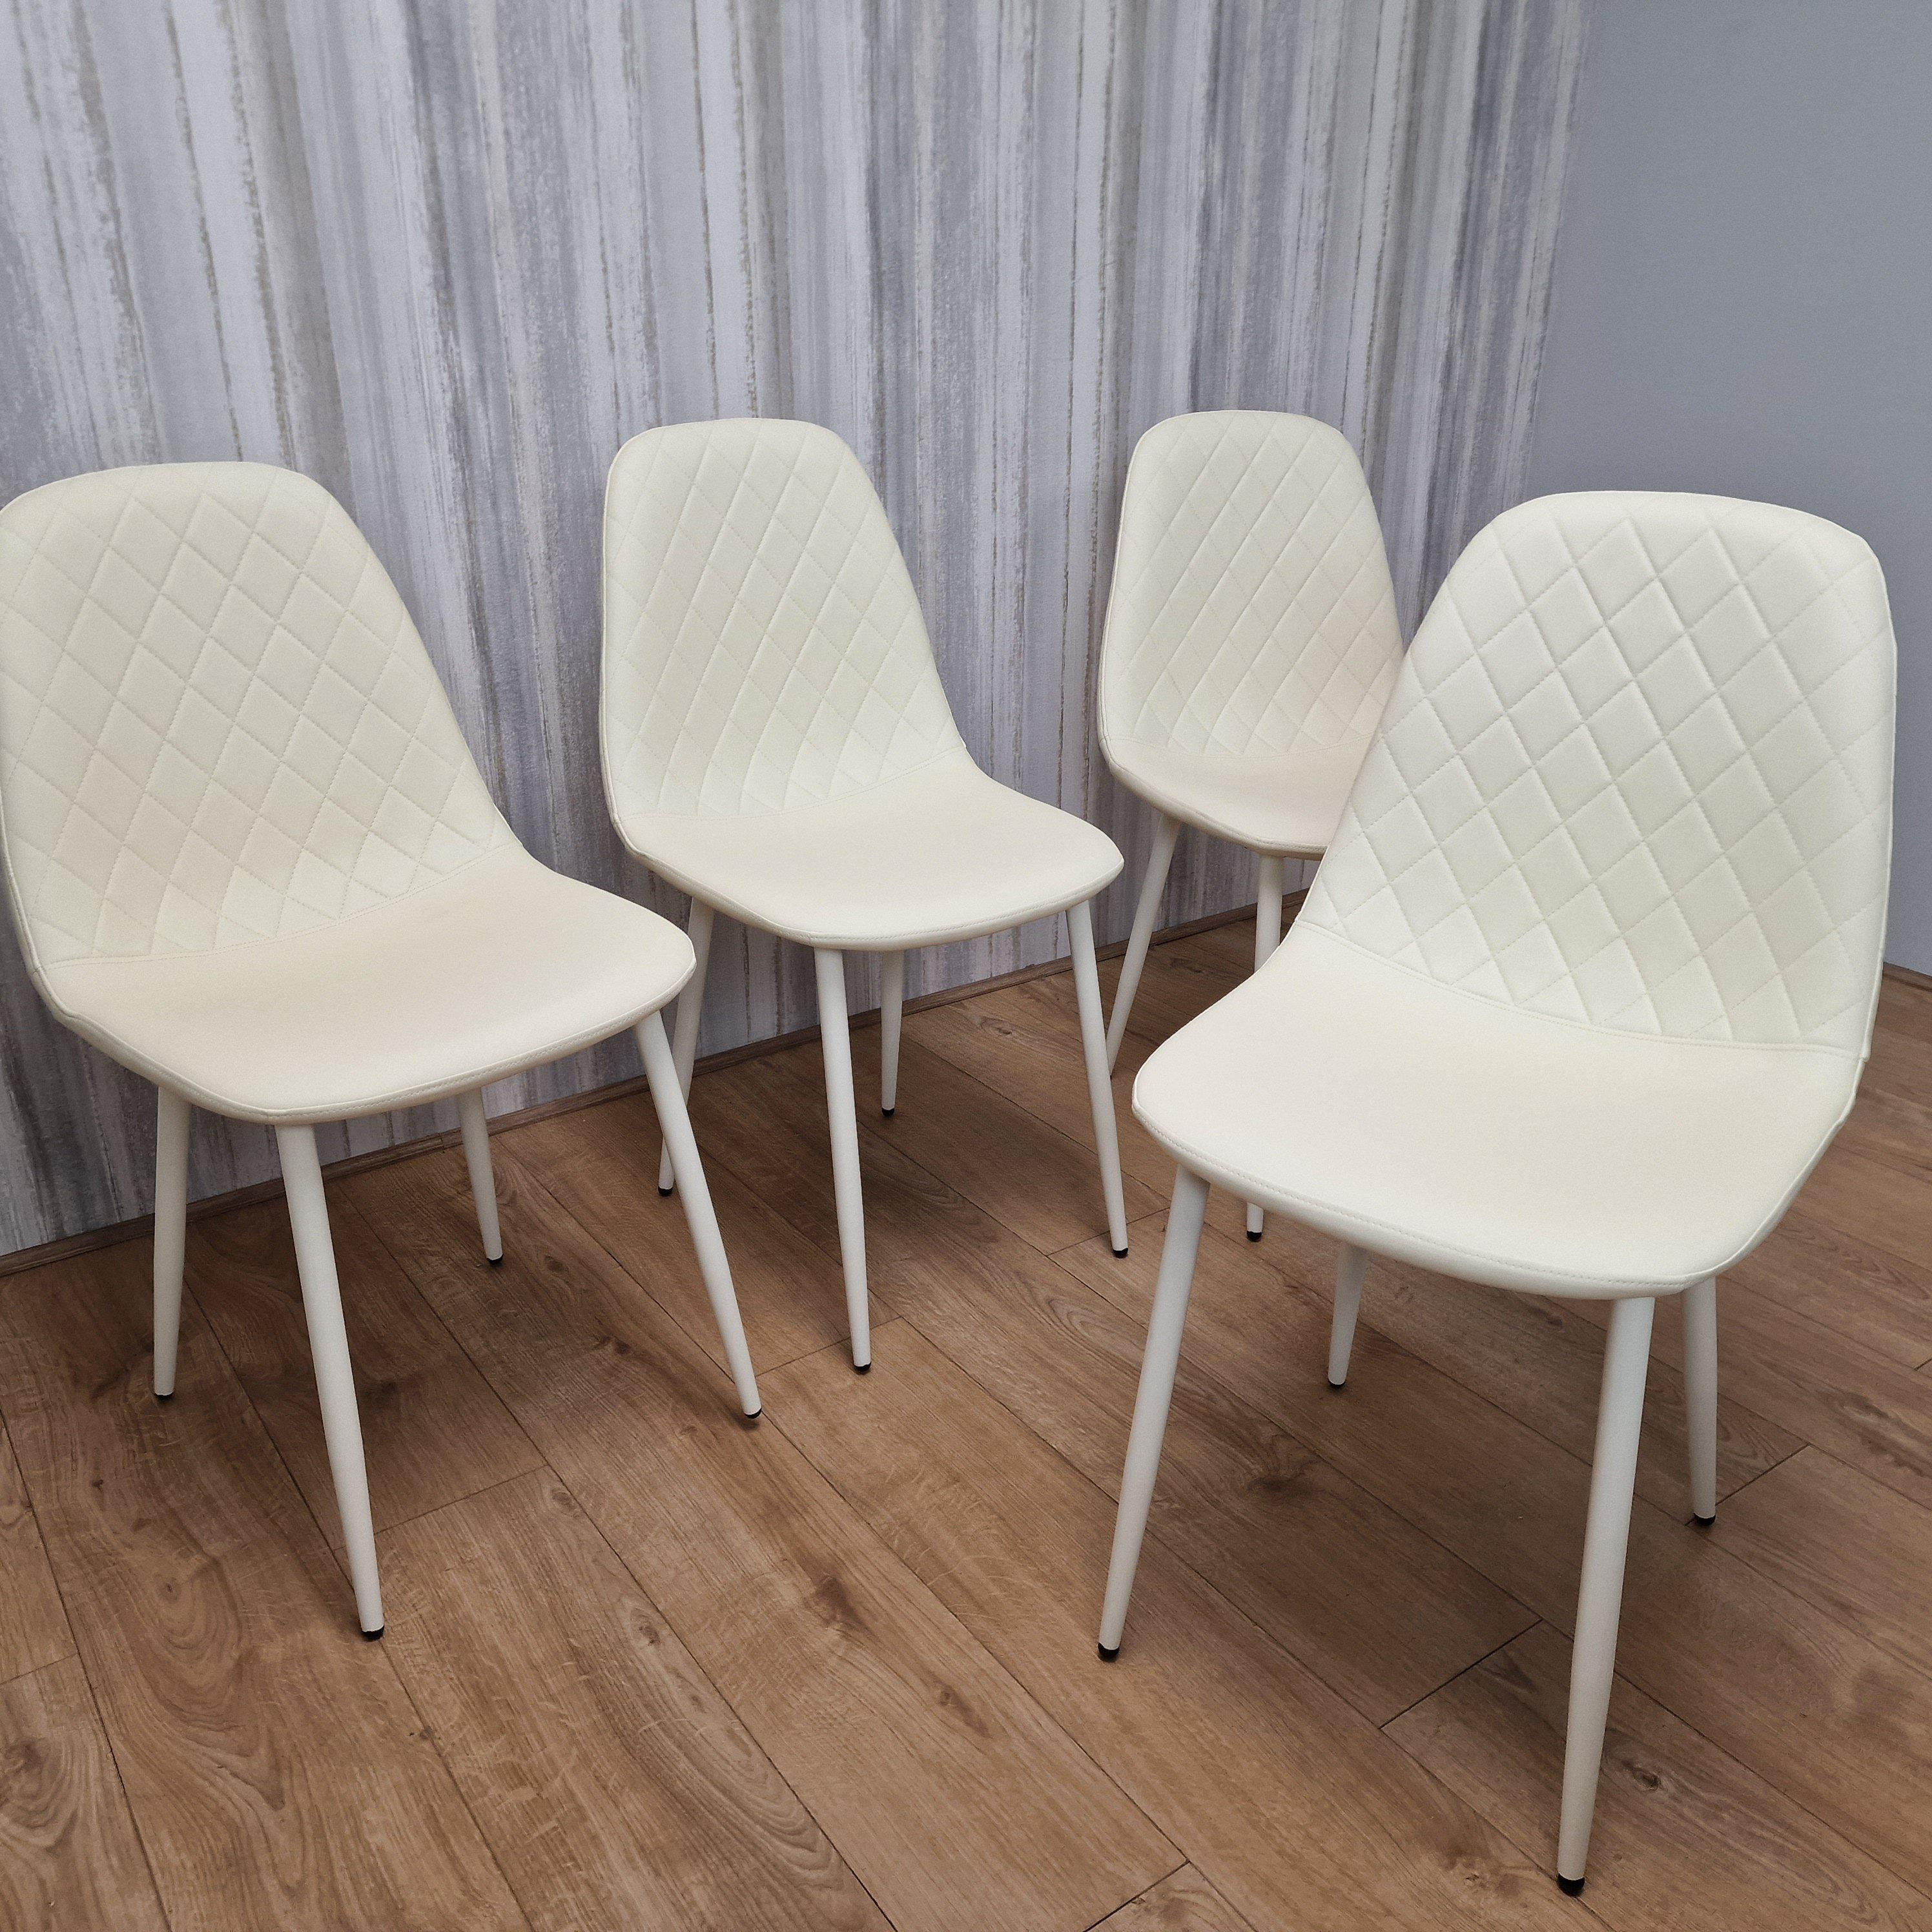 Dining Chairs Set Of 4 Cream Chairs Stitched Faux Leather Chairs, Soft Padded Seat Living Room Chairs , Kitchen Chairs - image 1